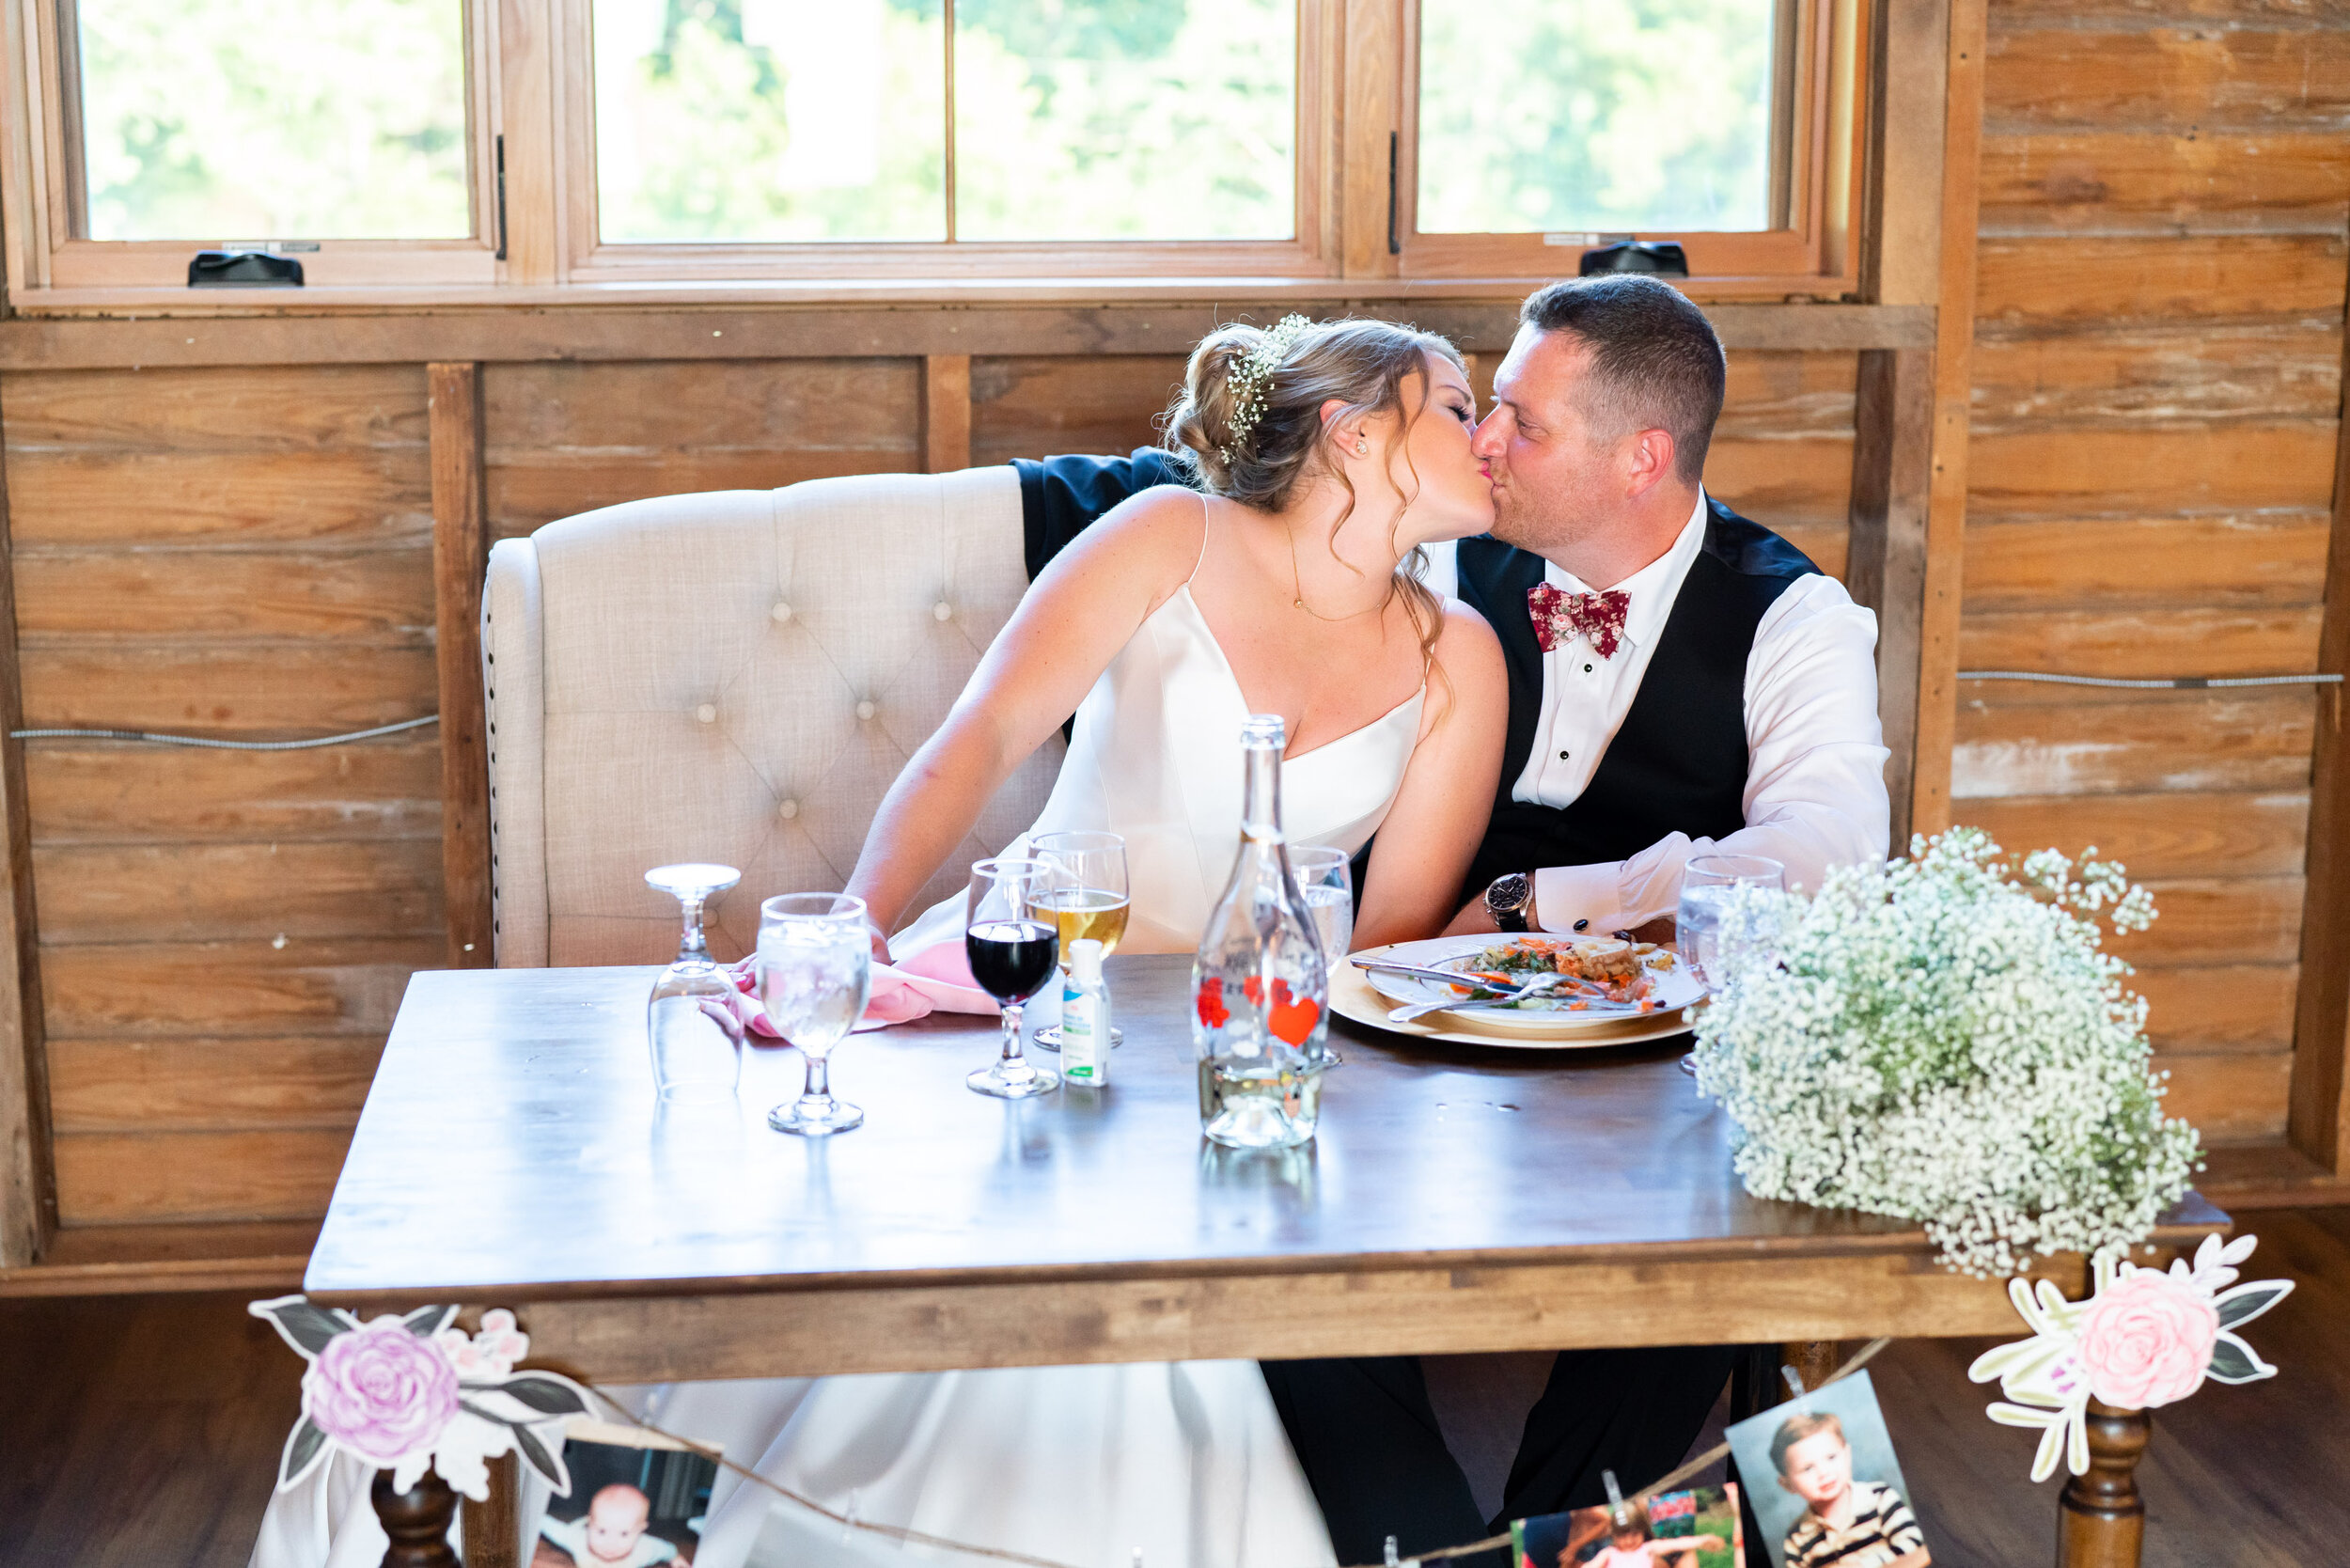 Bride and groom kiss at the sweetheart table in the barn